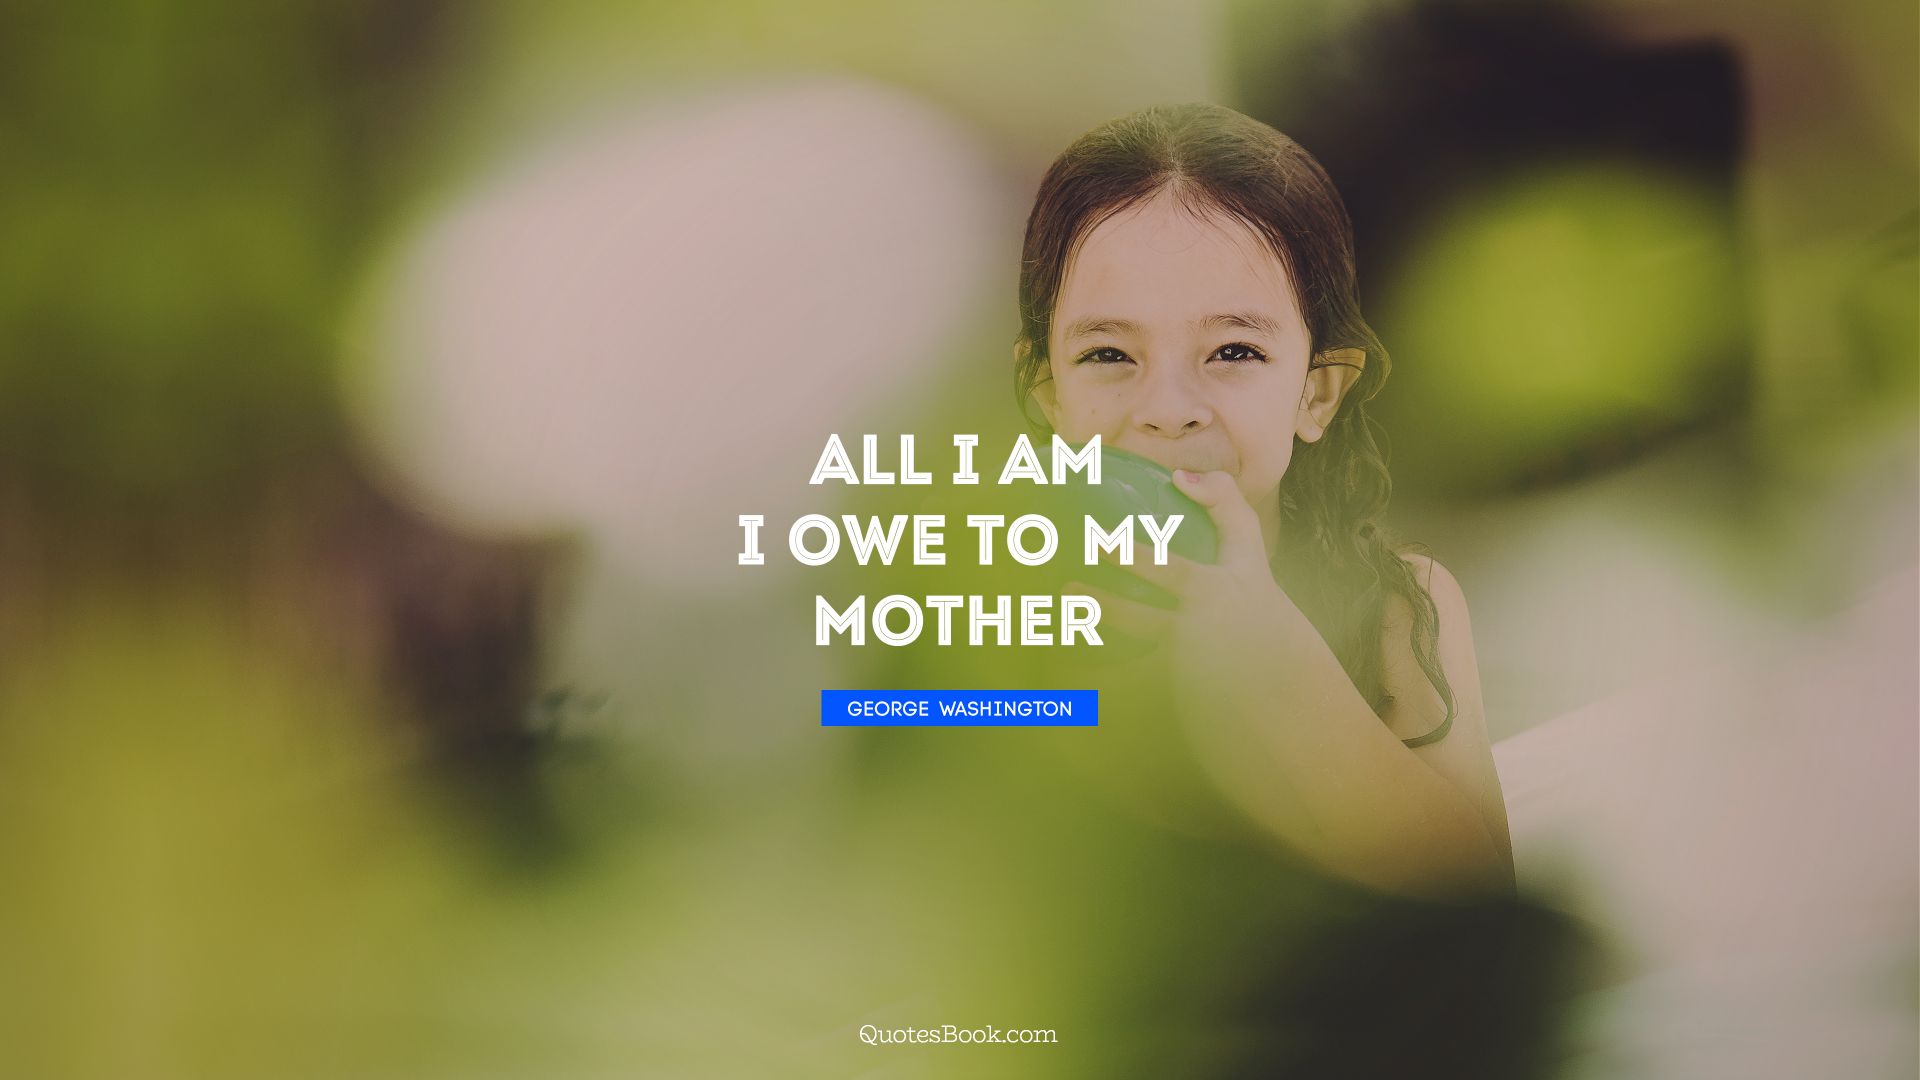 All I am I owe to my mother. - Quote by George Washington